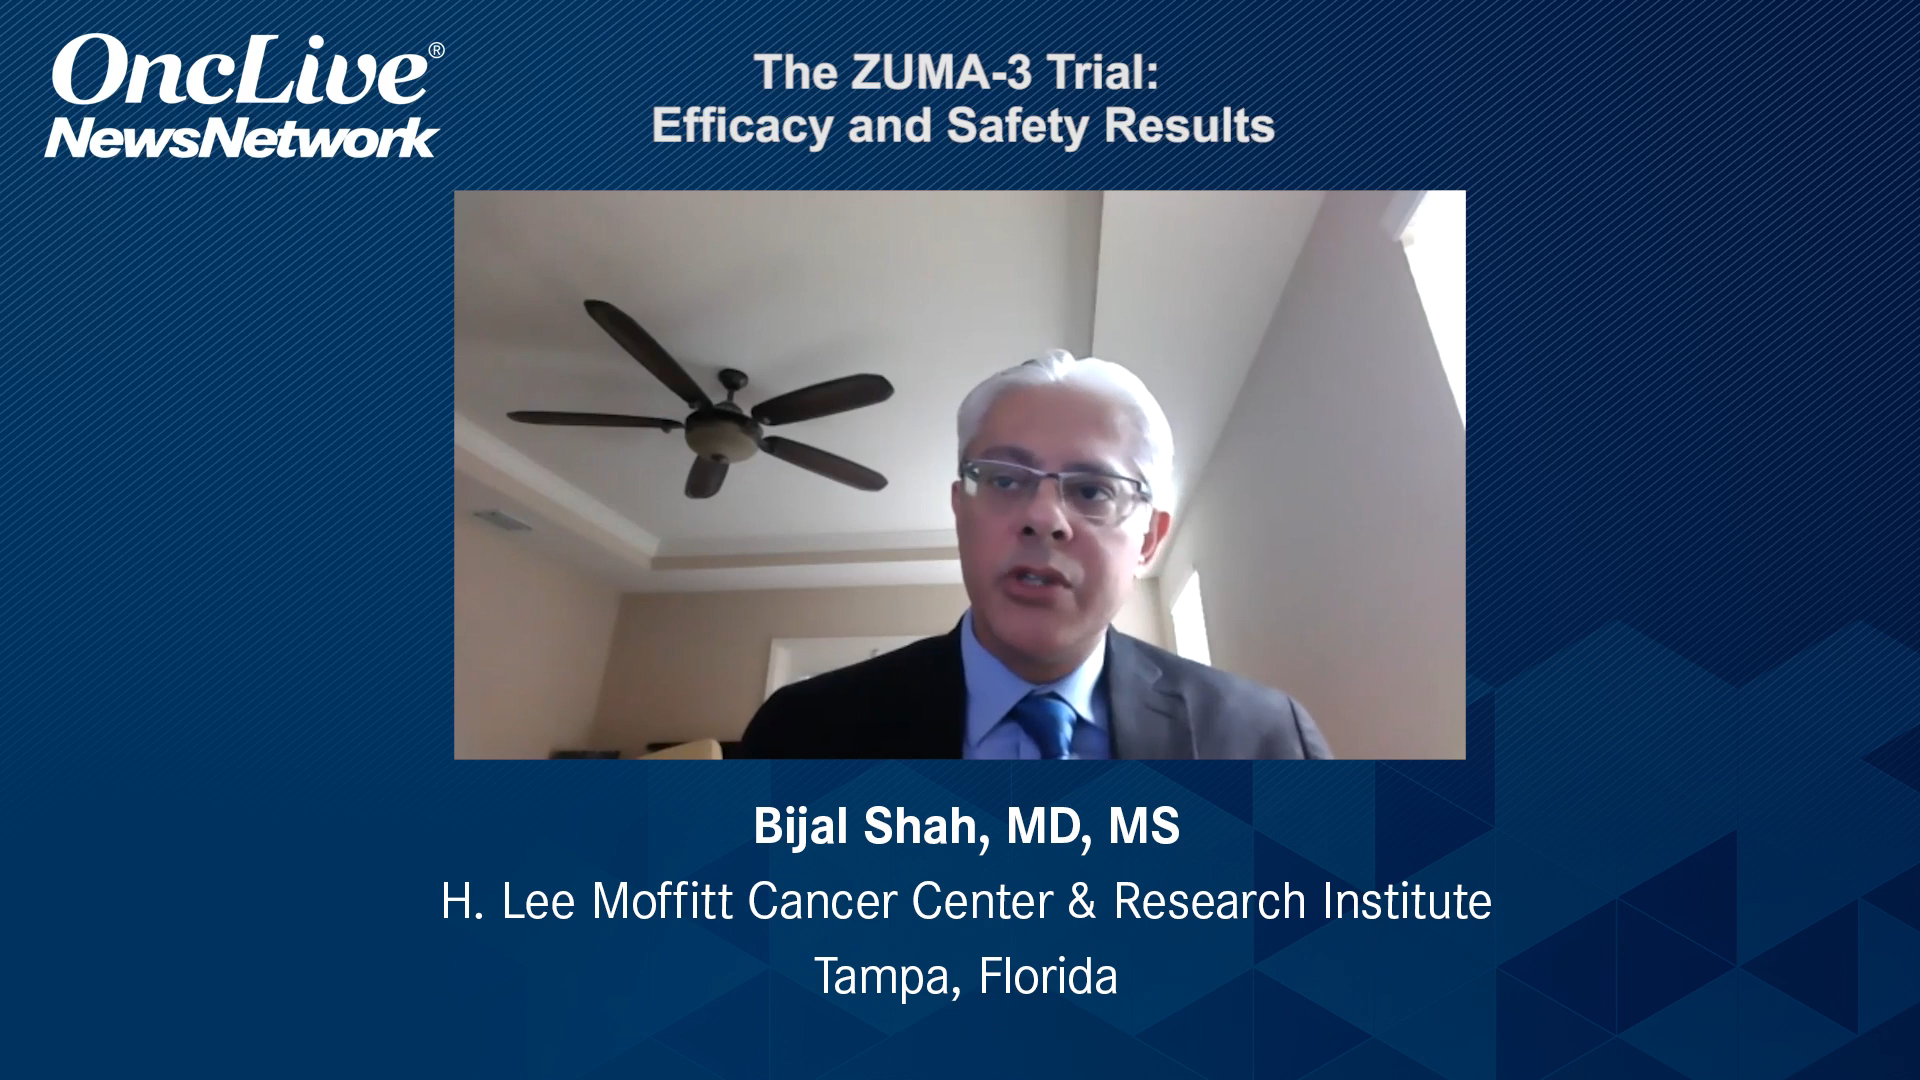 The ZUMA-3 Trial: Efficacy and Safety Results